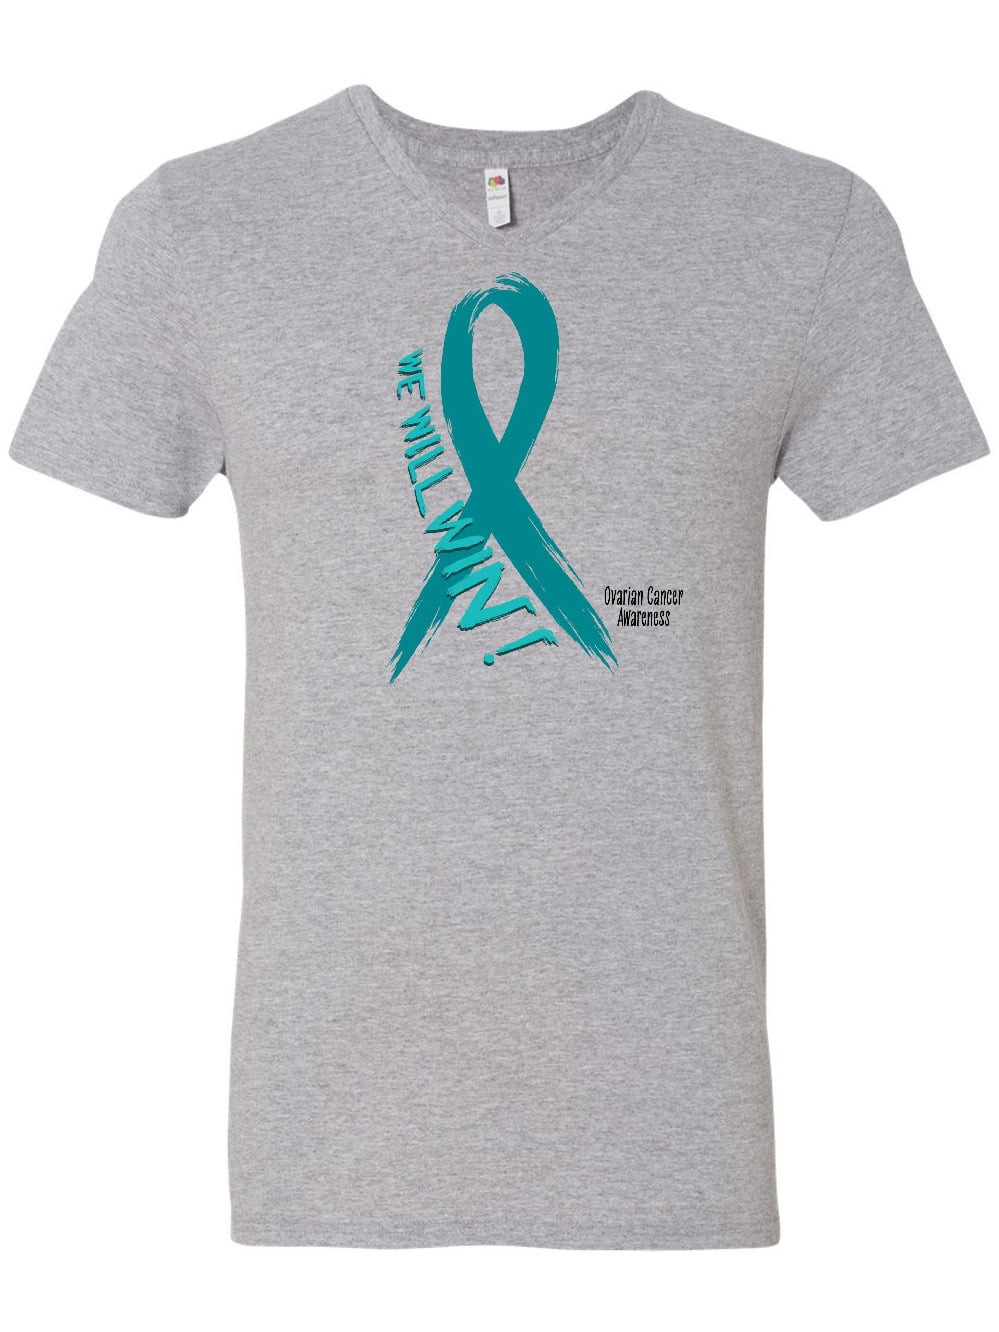 Ovarian Cancer for My Mens Big Tall Graphic T Shirt Loose Fit Solid Dress Tops 